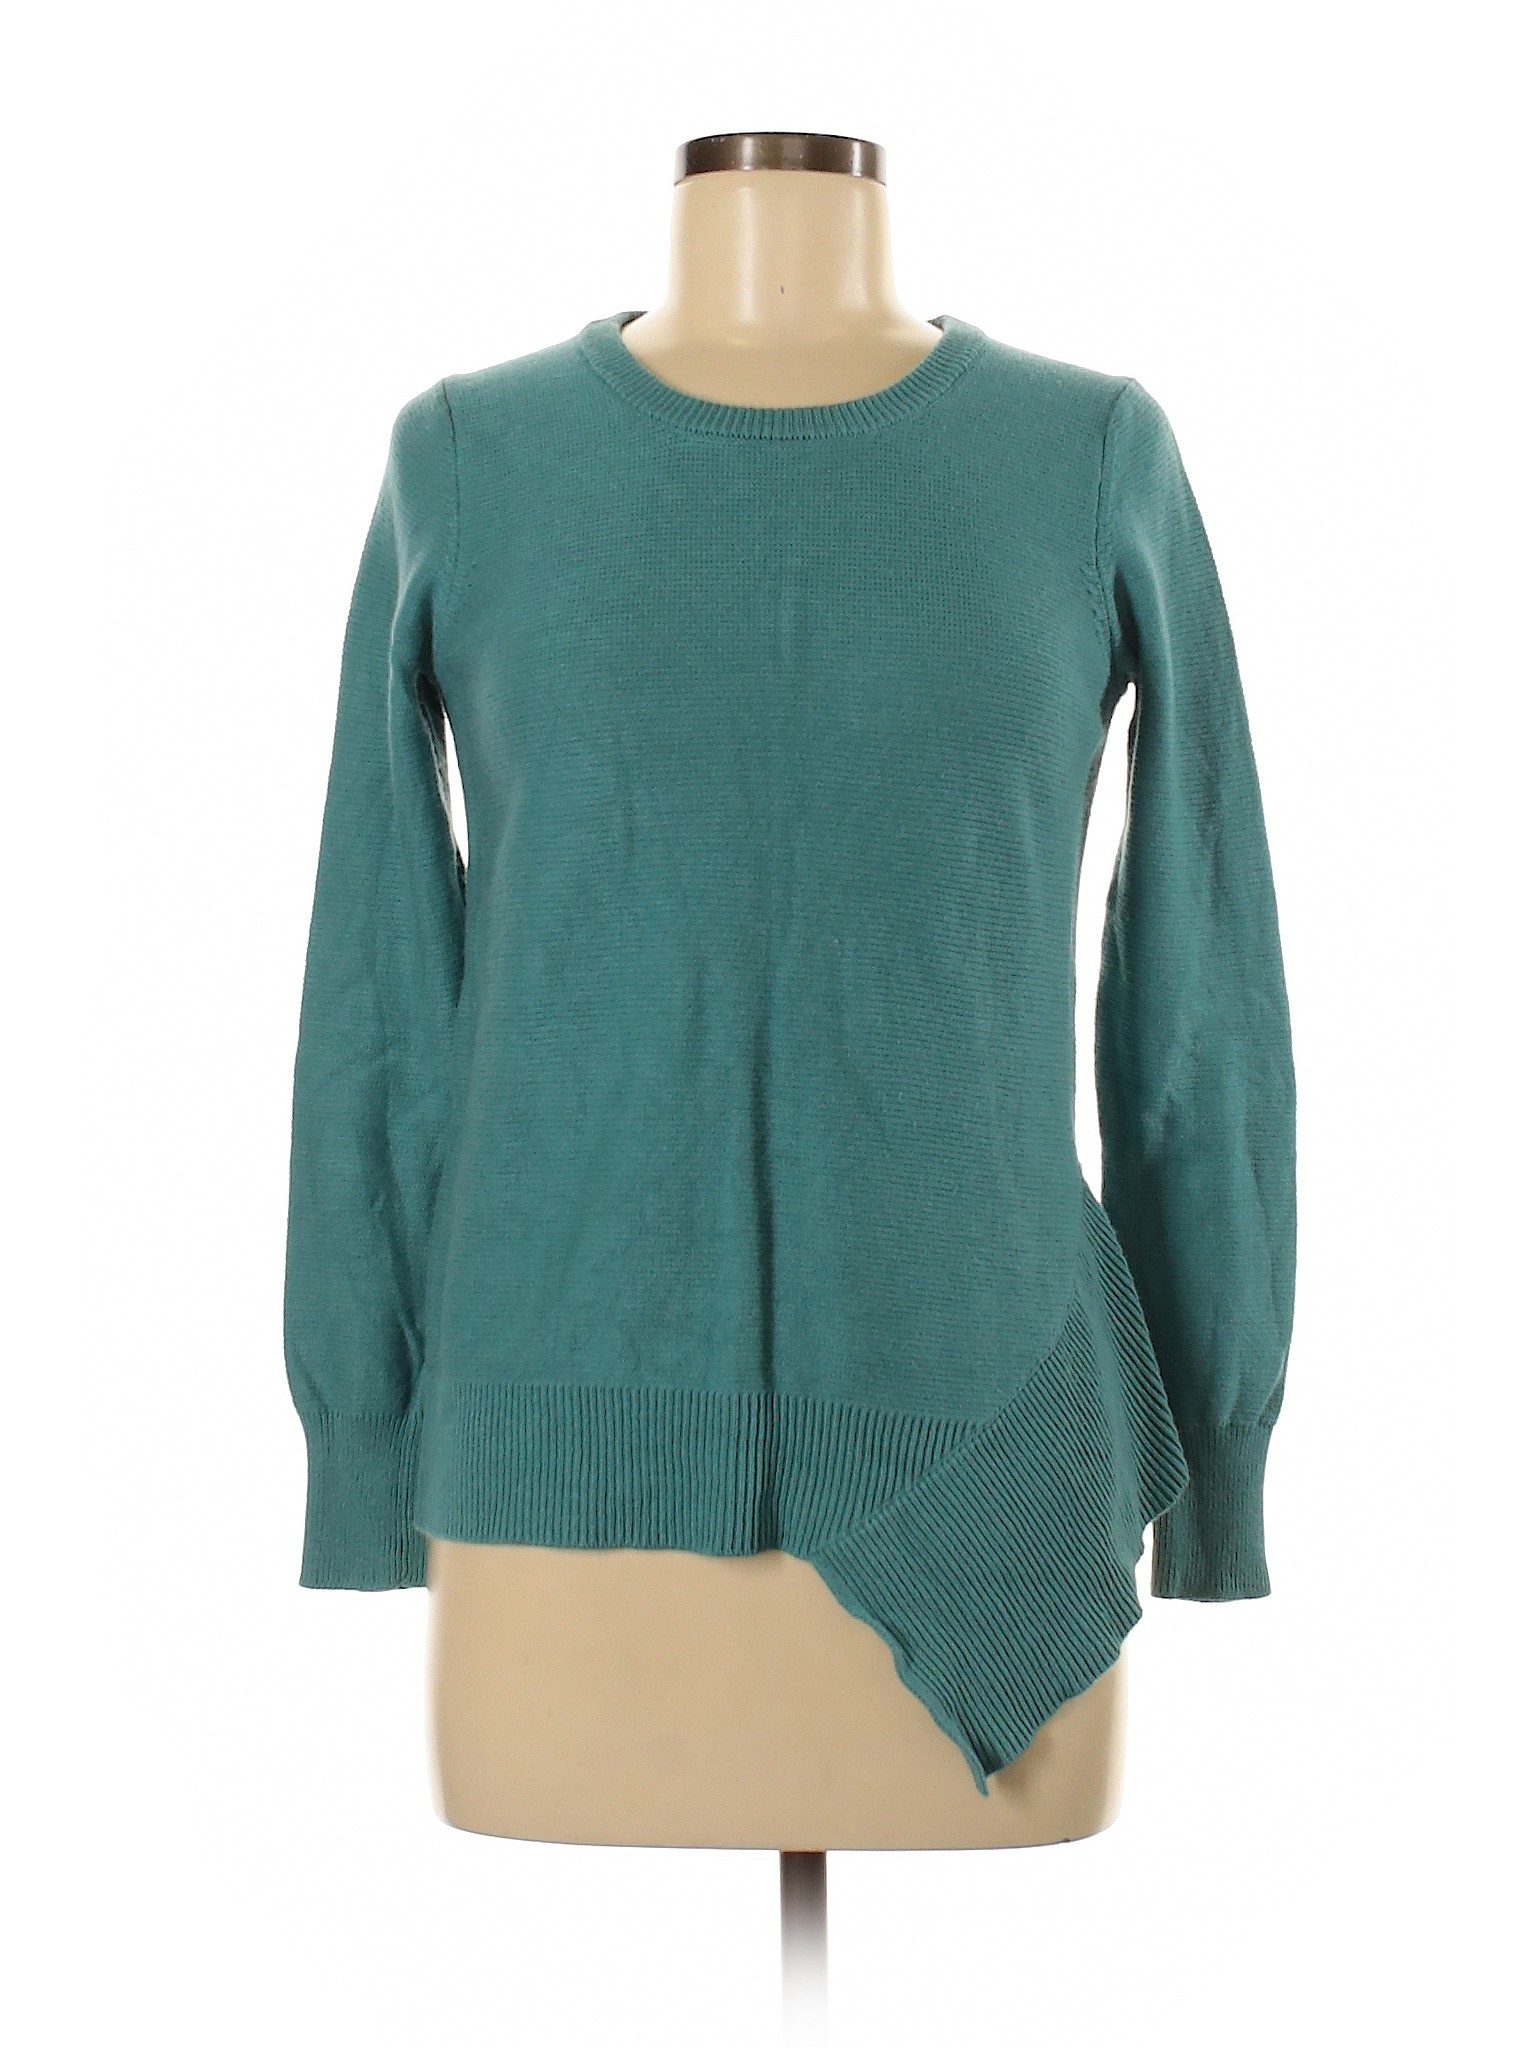 The Limited Women Green Pullover Sweater M | eBay